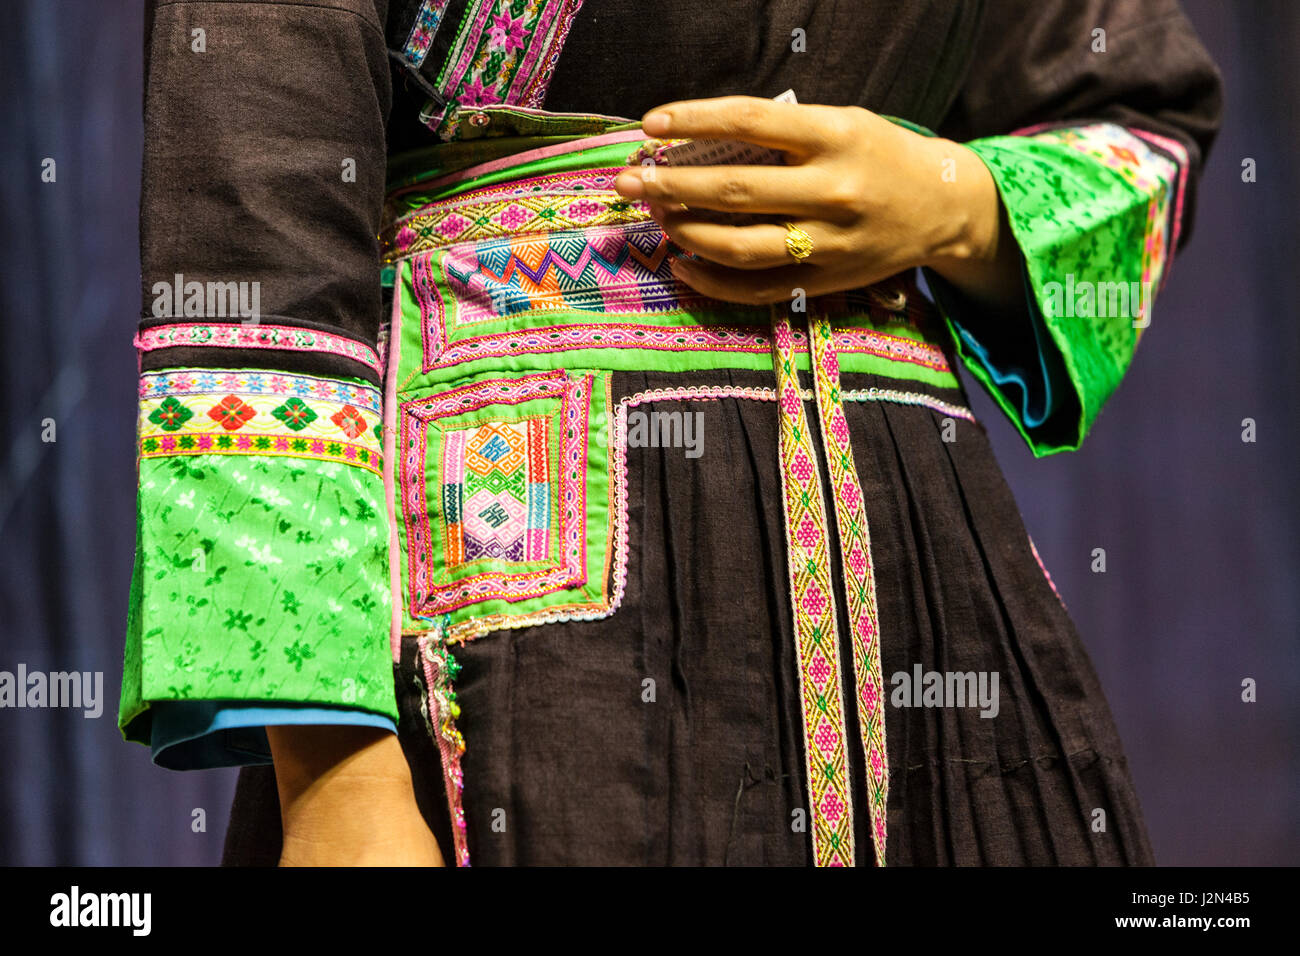 Zhaoxing, Guizhou, China.  Embroidered Waistband Decoration of a Woman's Dress of the Dong Ethnic Minority. Stock Photo